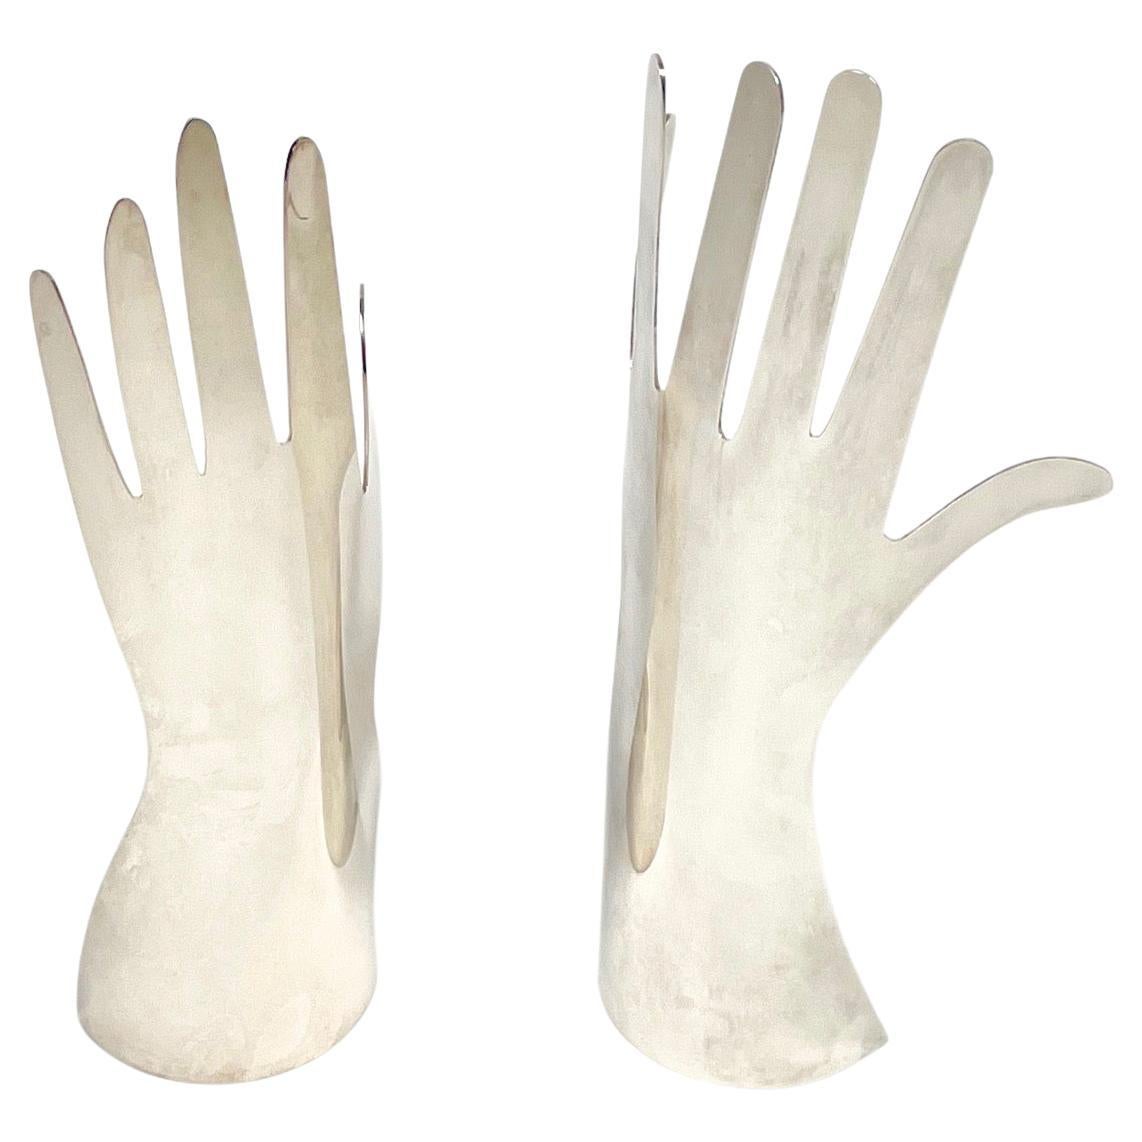 Two Silvered Metal Hands by Gio Ponti for Sabattini, Italy, 1978